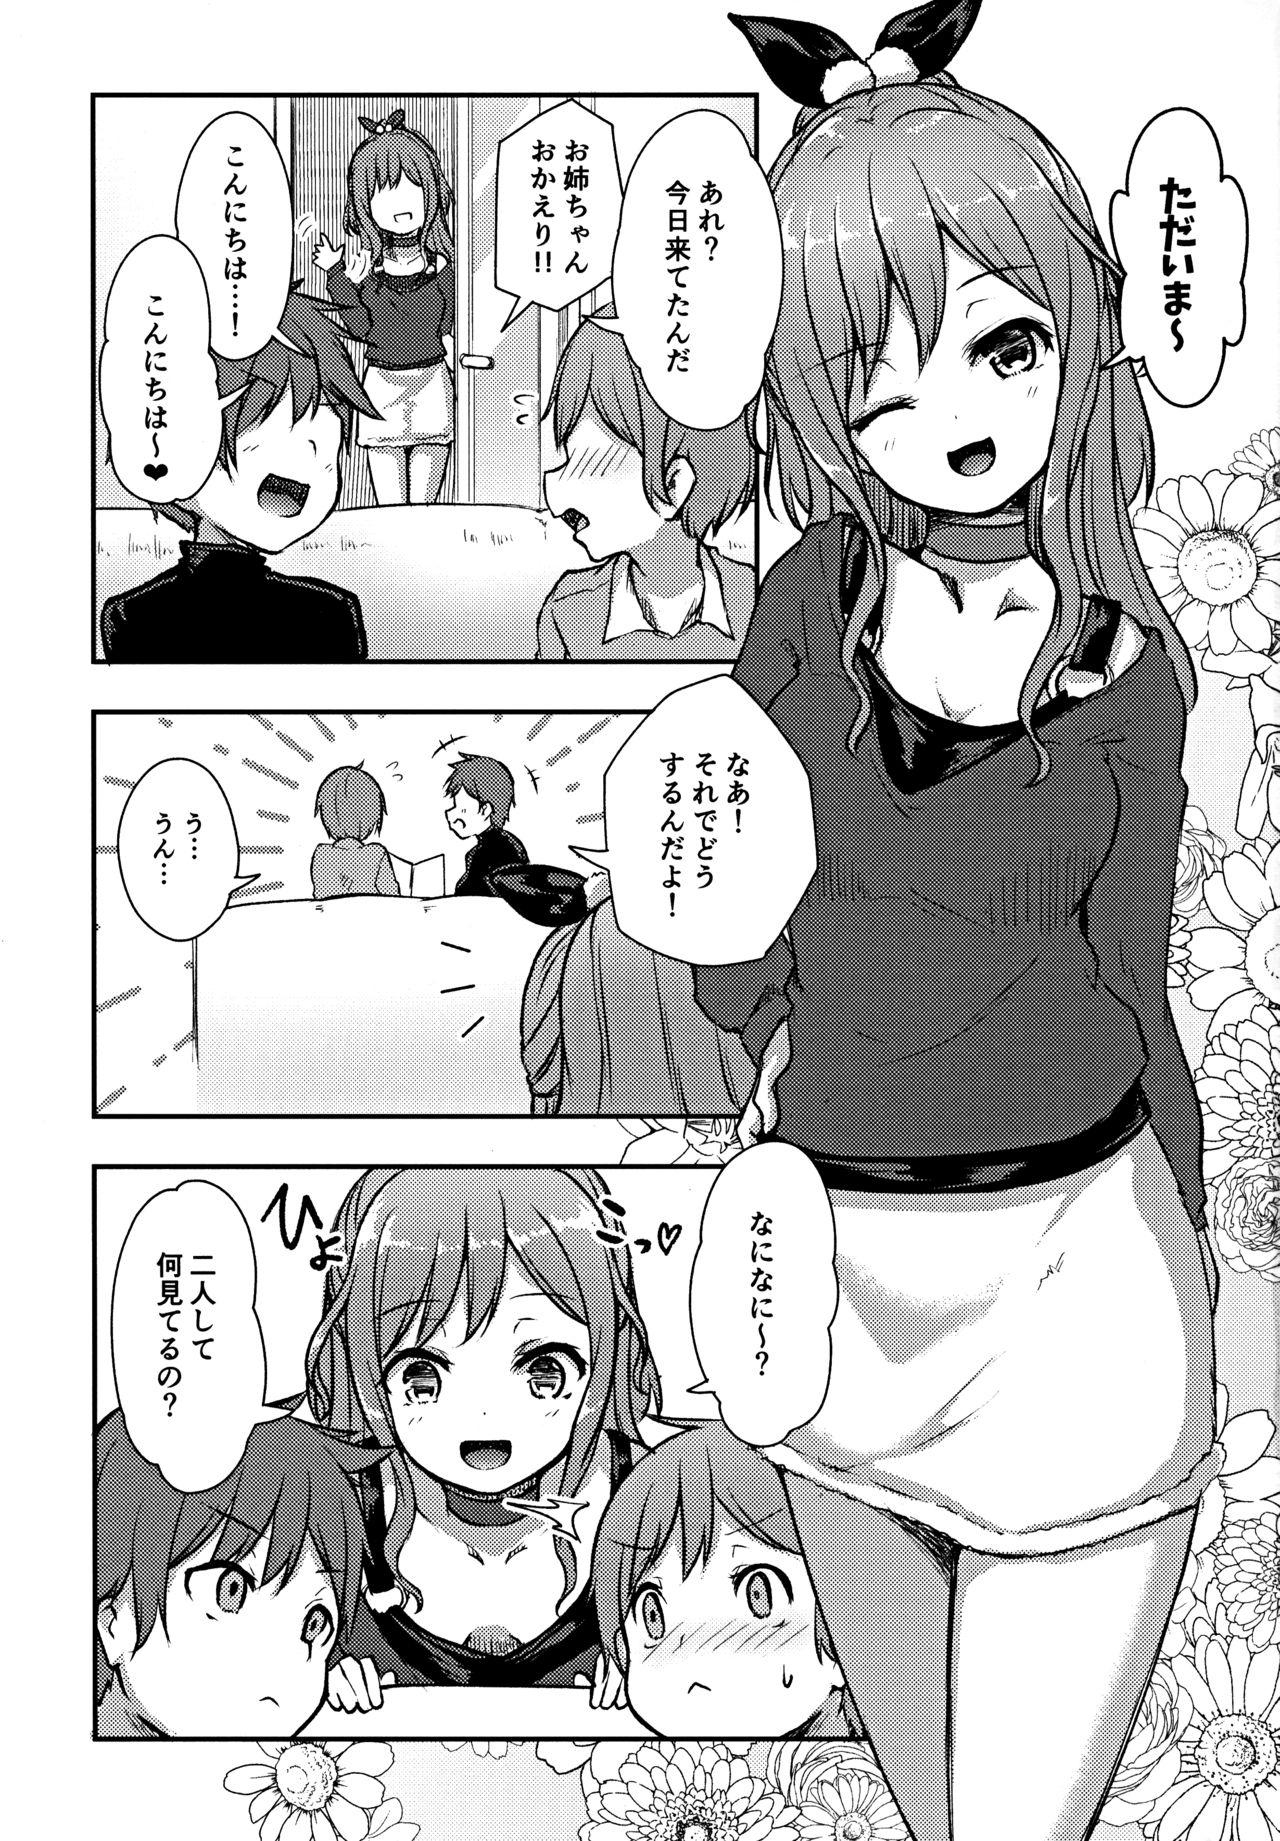 Roundass Hearty Hybrid Household - Bang dream Gay Dudes - Page 2